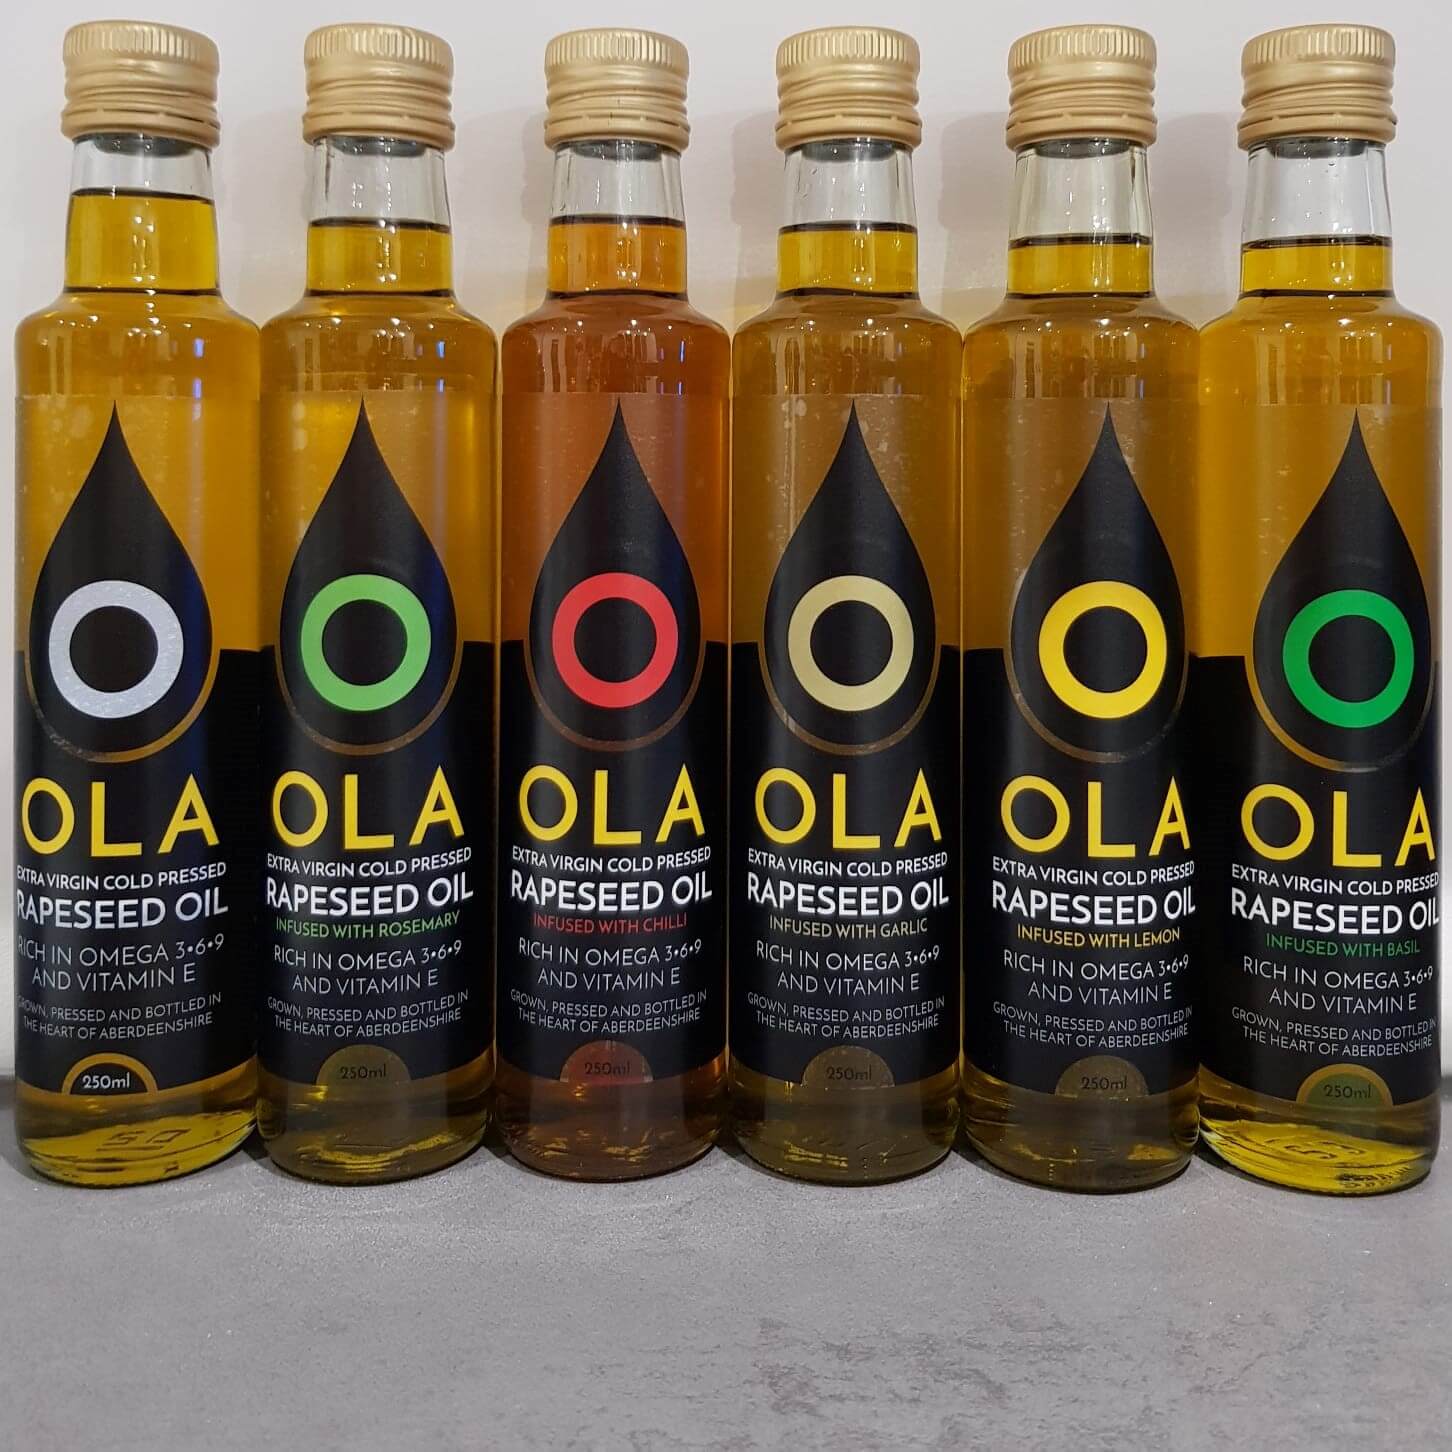 Image of Ola Infused Rapseed Oil made in the UK. Buying this product supports a UK business, jobs and the local community